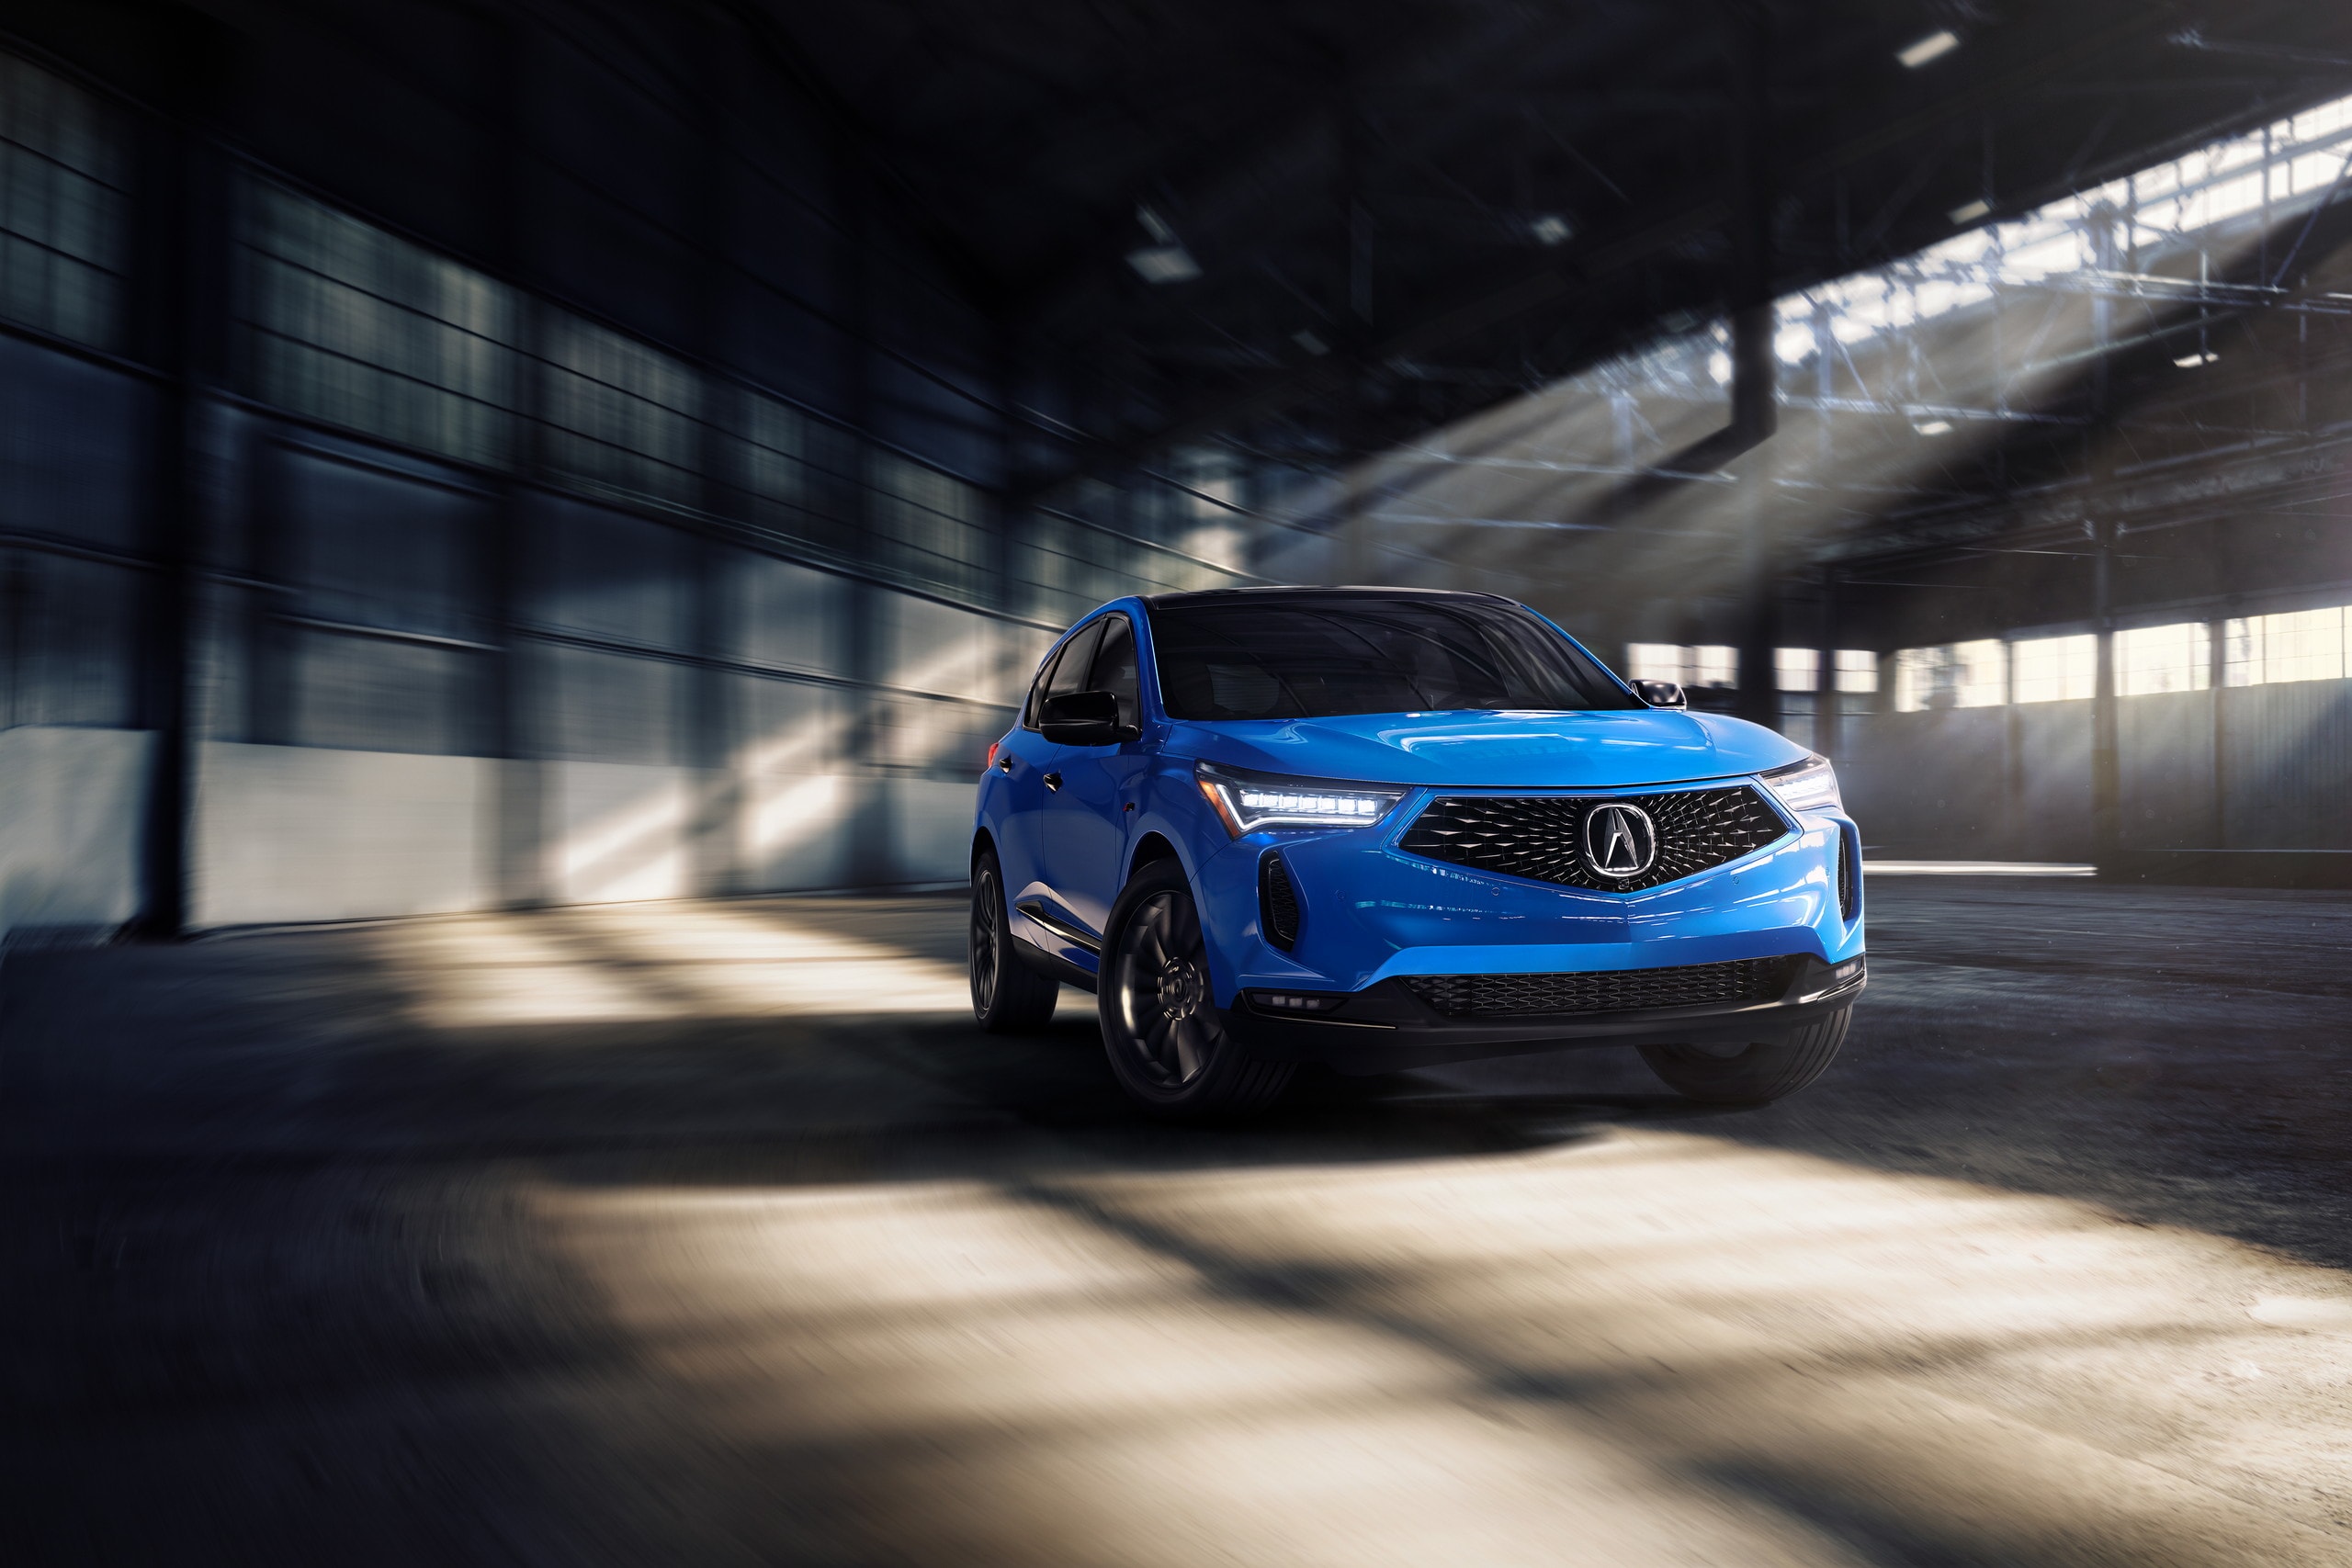 2019 Acura RDX Prototype Looks Good from the Front in Detroit -  autoevolution